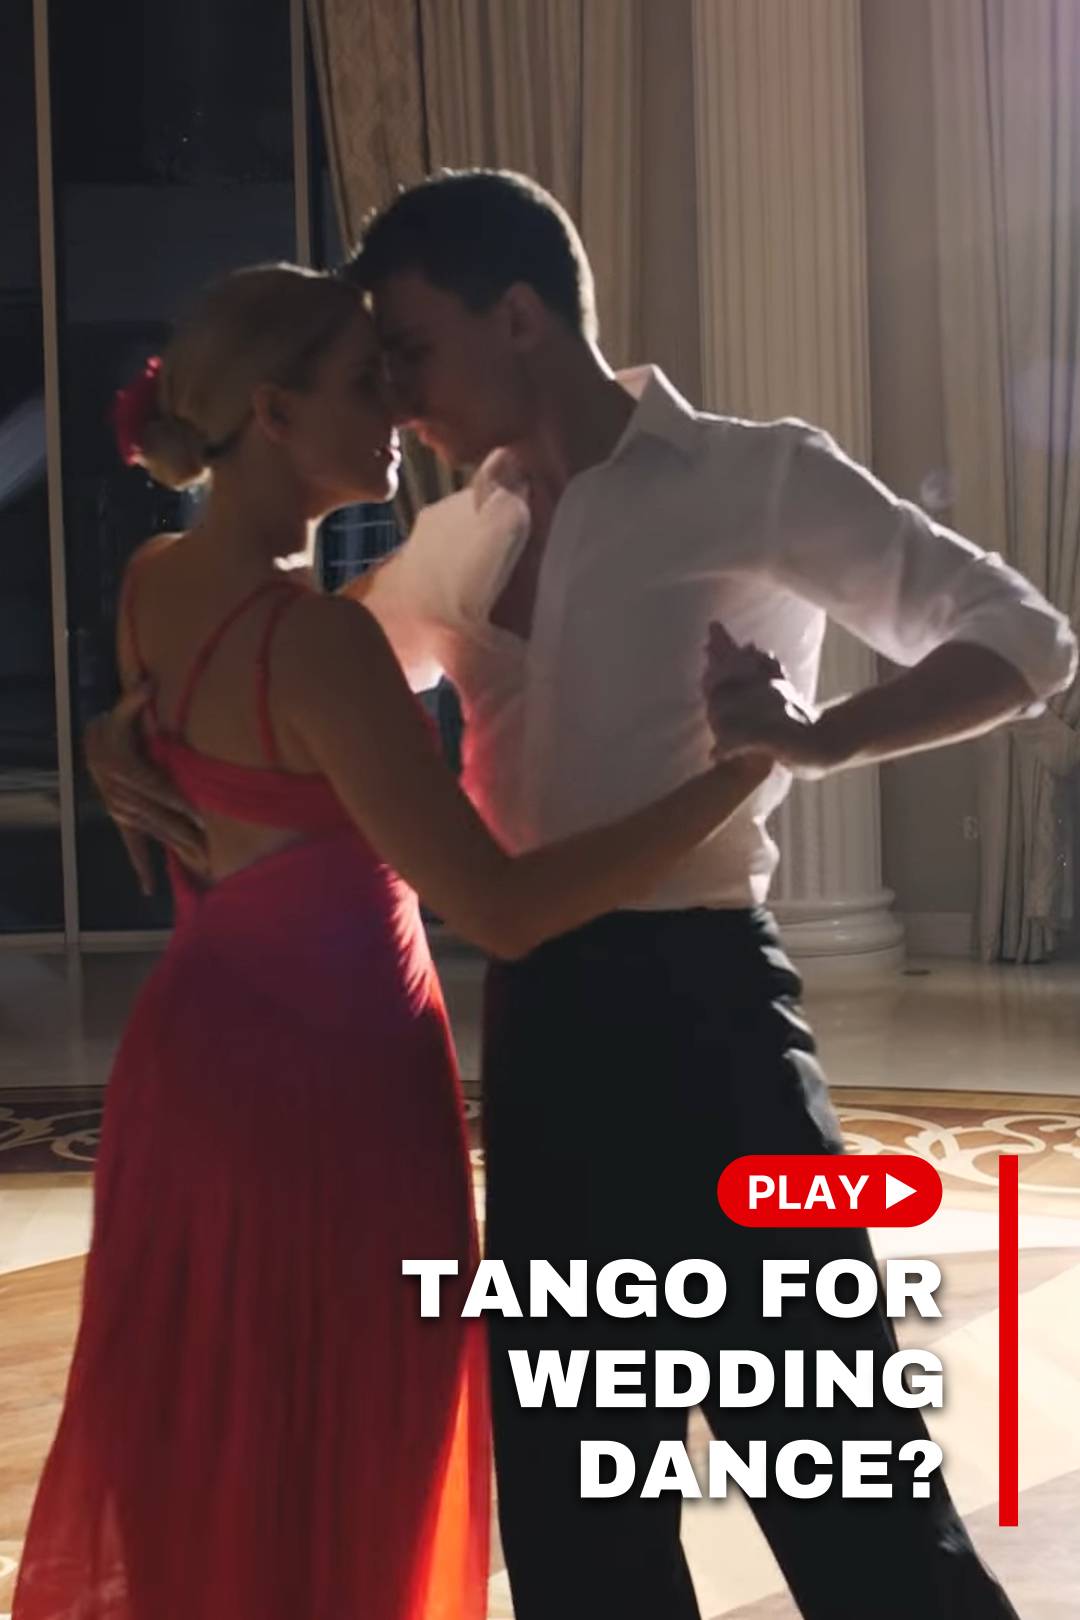 Women in a red dress dancing tango with a man in white shirt and black pants